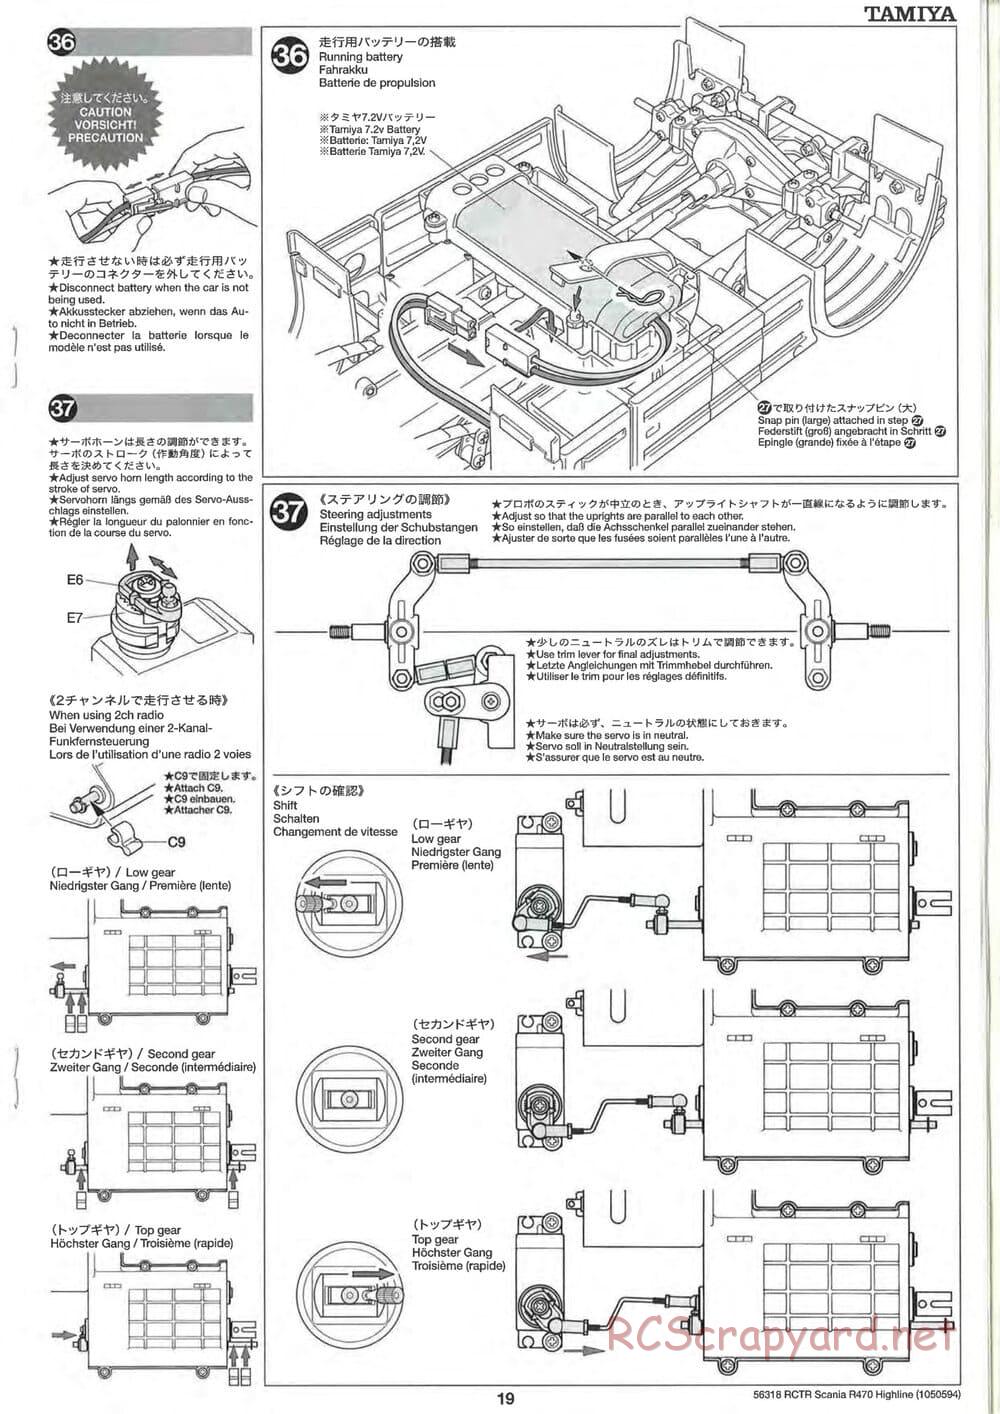 Tamiya - Scania R470 Highline Tractor Truck Chassis - Manual - Page 19